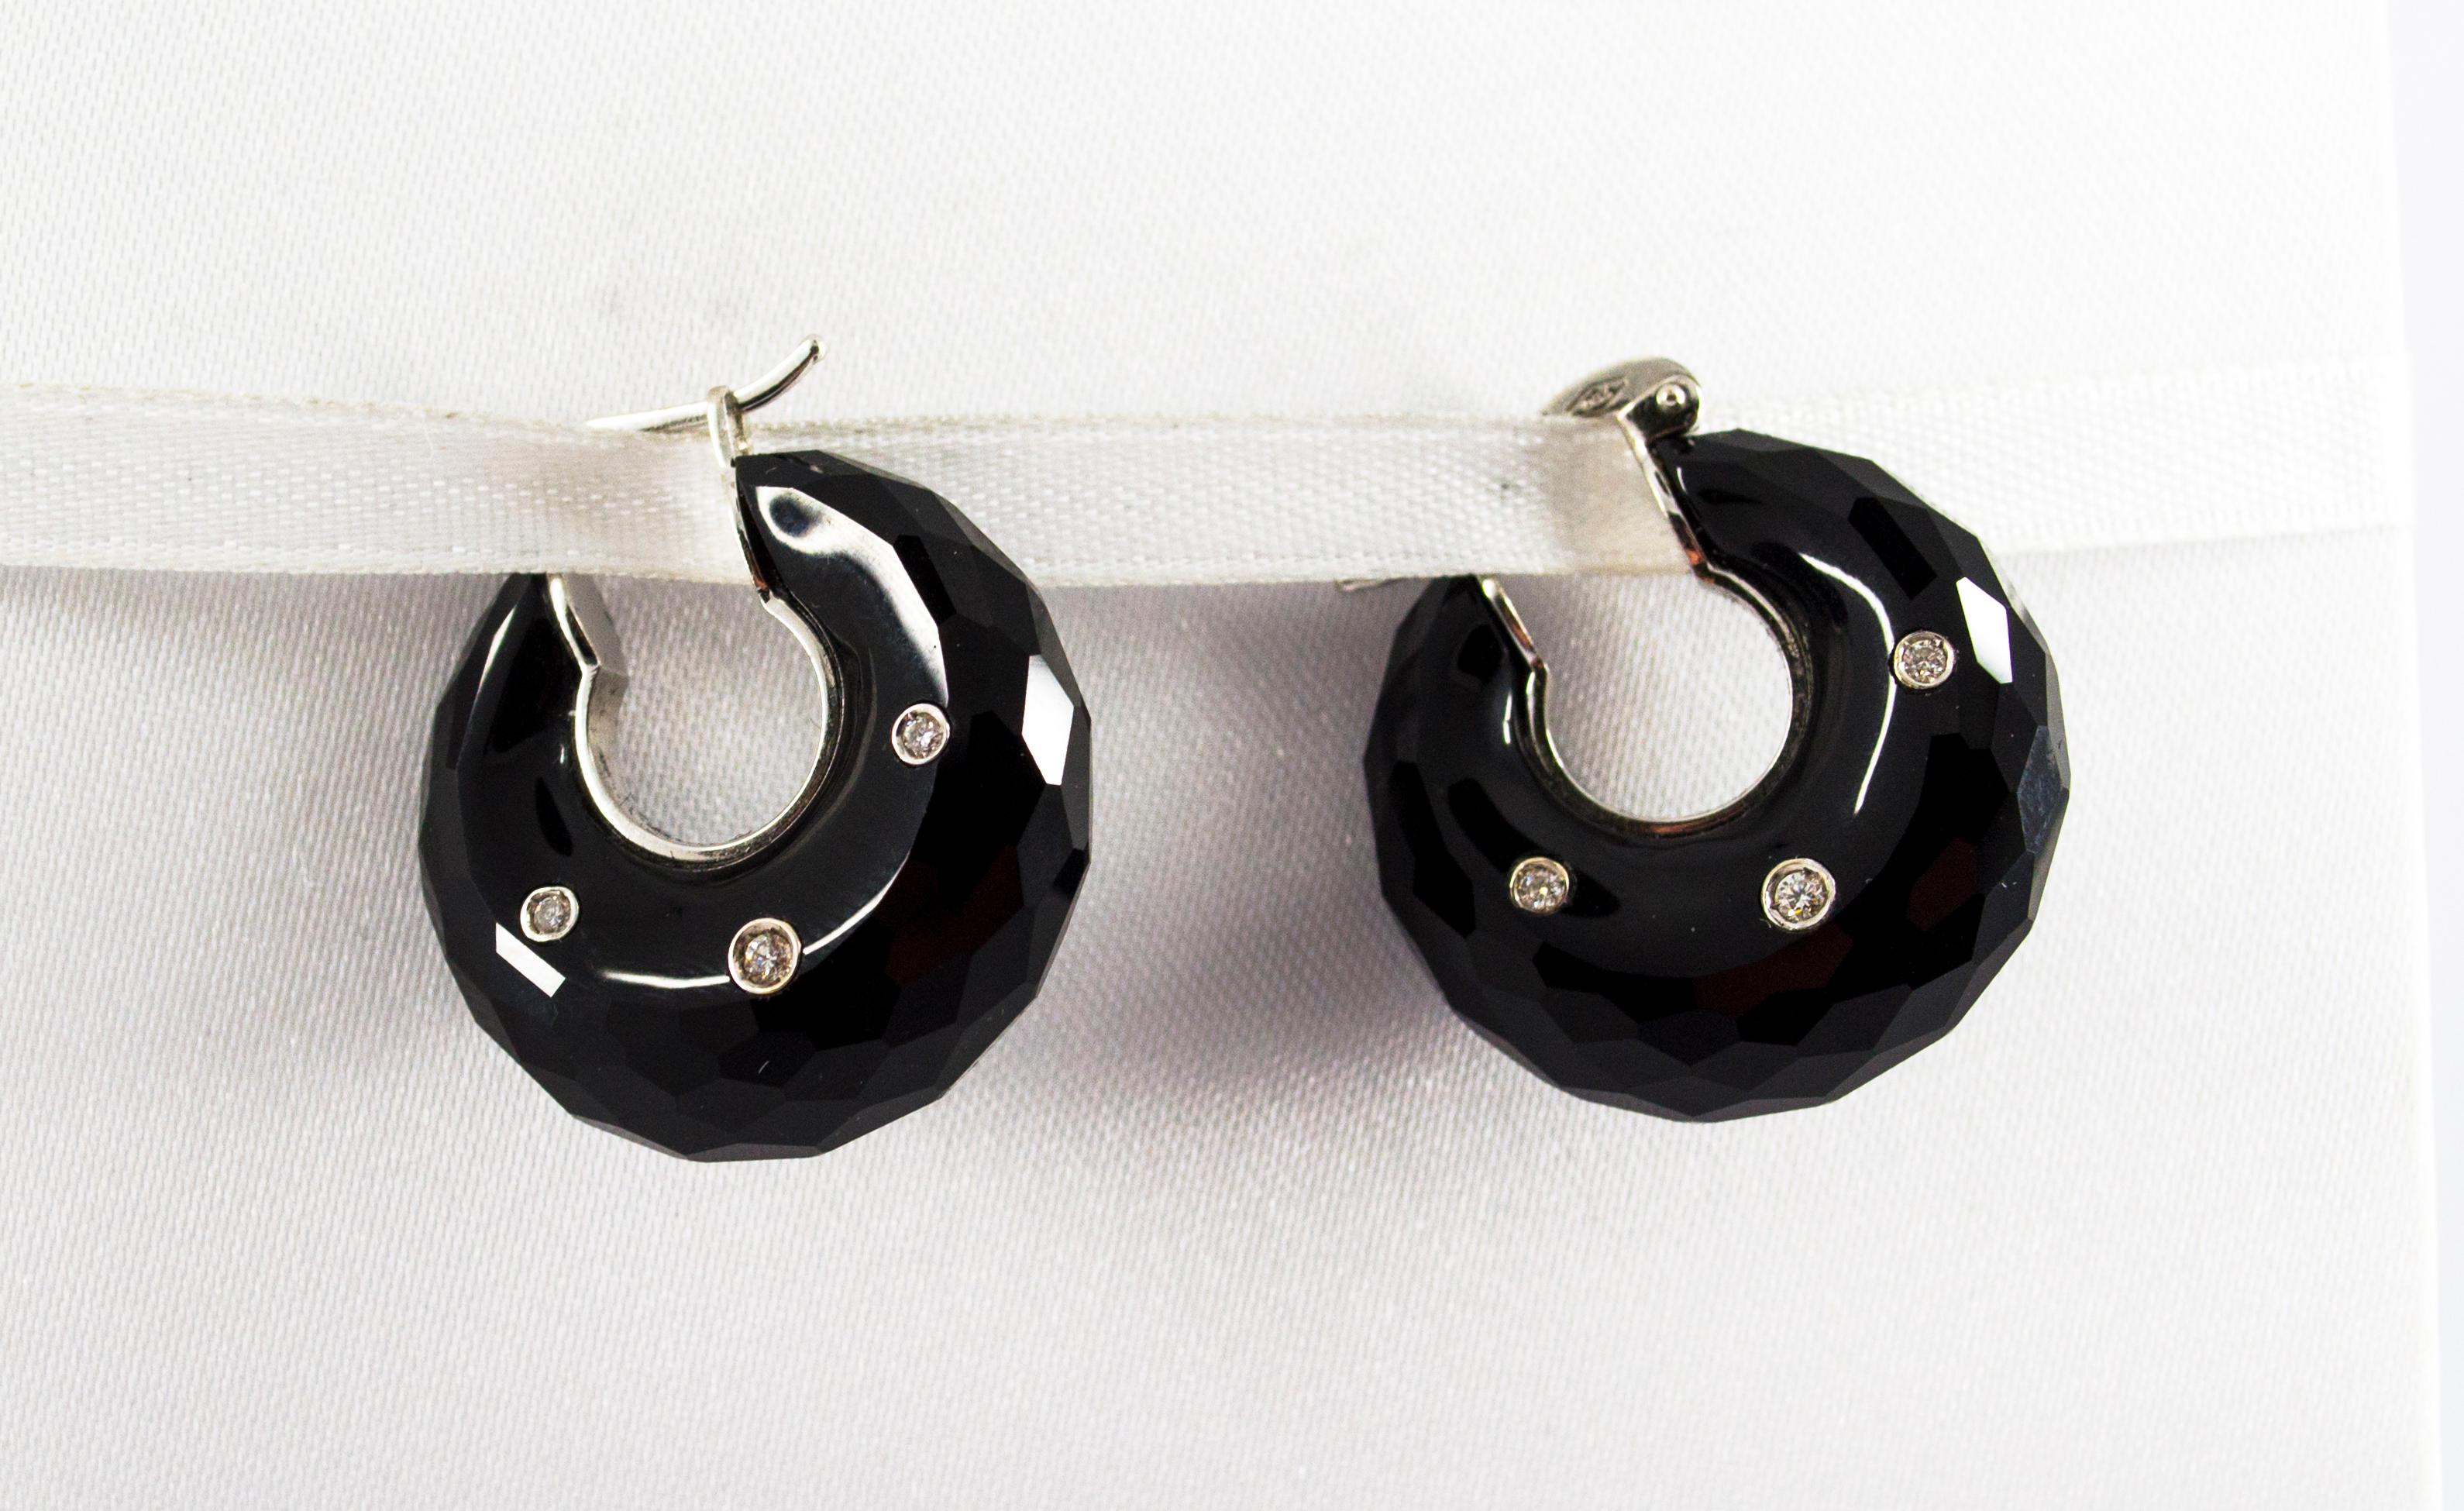 These Earrings are made of 18K White Gold.
These Earrings have 0.20 Carats of White Diamonds.
These Earrings have also Onyx.
All our Earrings have pins for pierced ears but we can change the closure and make any of our Earrings suitable even for